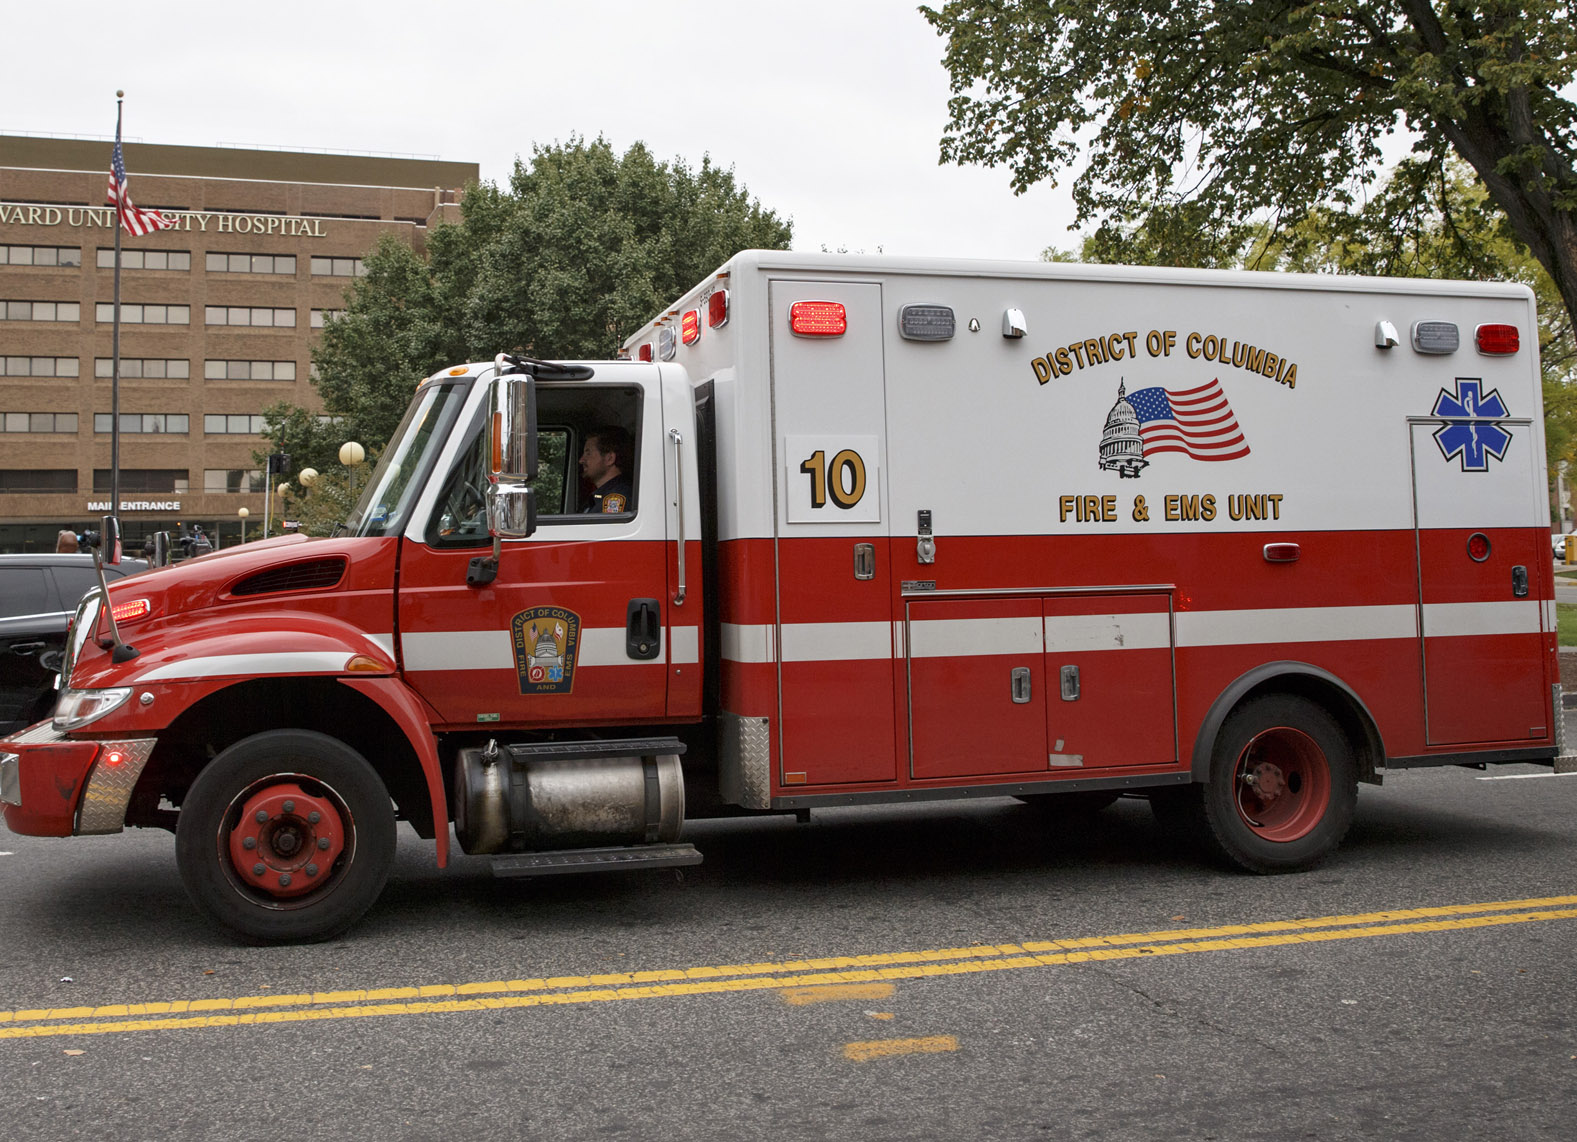 Man in critical condition after crash with DC ambulance